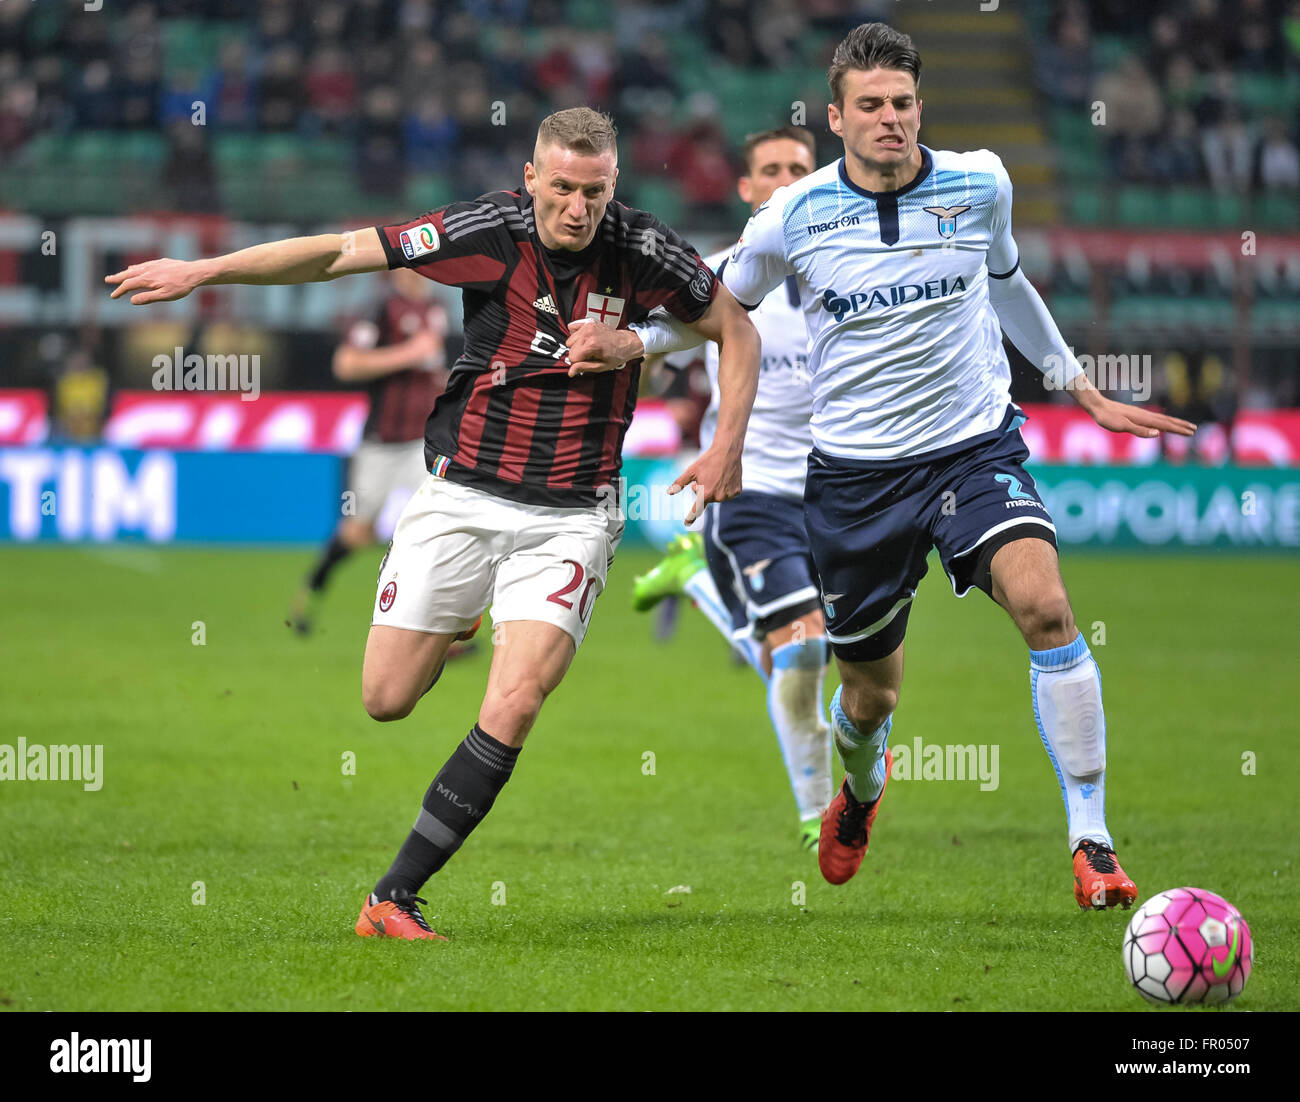 Milan, Italy. 20 mar, 2016: Ignazio Abate (left) and Wasley Hoedt compete for the ball  during the Serie A football match between AC Milan and SS Lazio at Giuseppe Meazza Stadium in Milan, Italy. Credit:  Nicolò Campo/Alamy Live News Stock Photo